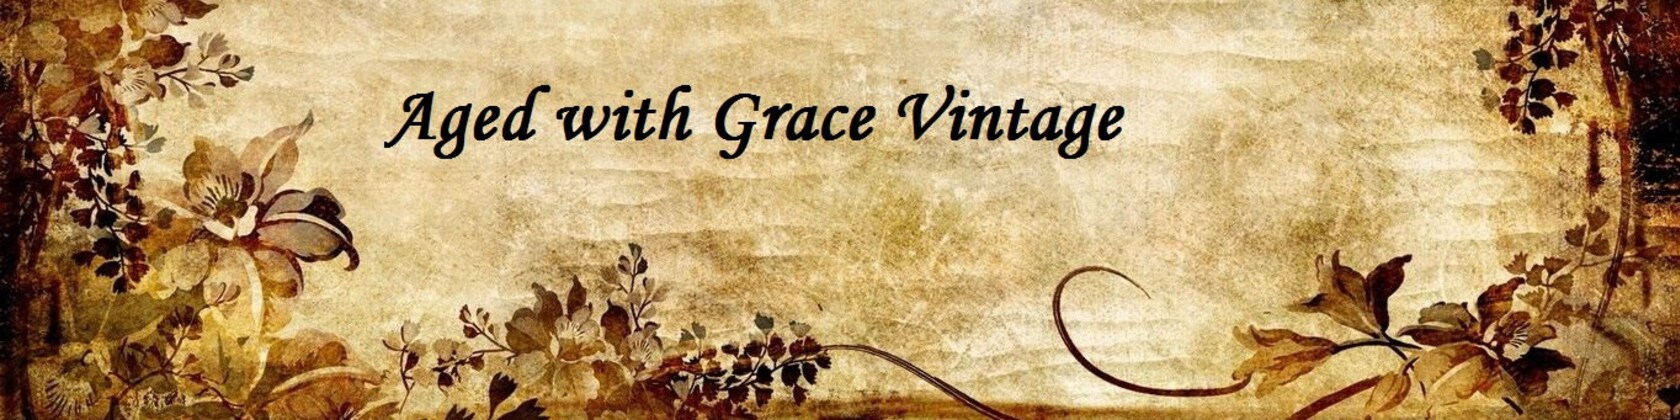 Pre-loved vintage home decor. by AgedwithGraceVintage on Etsy